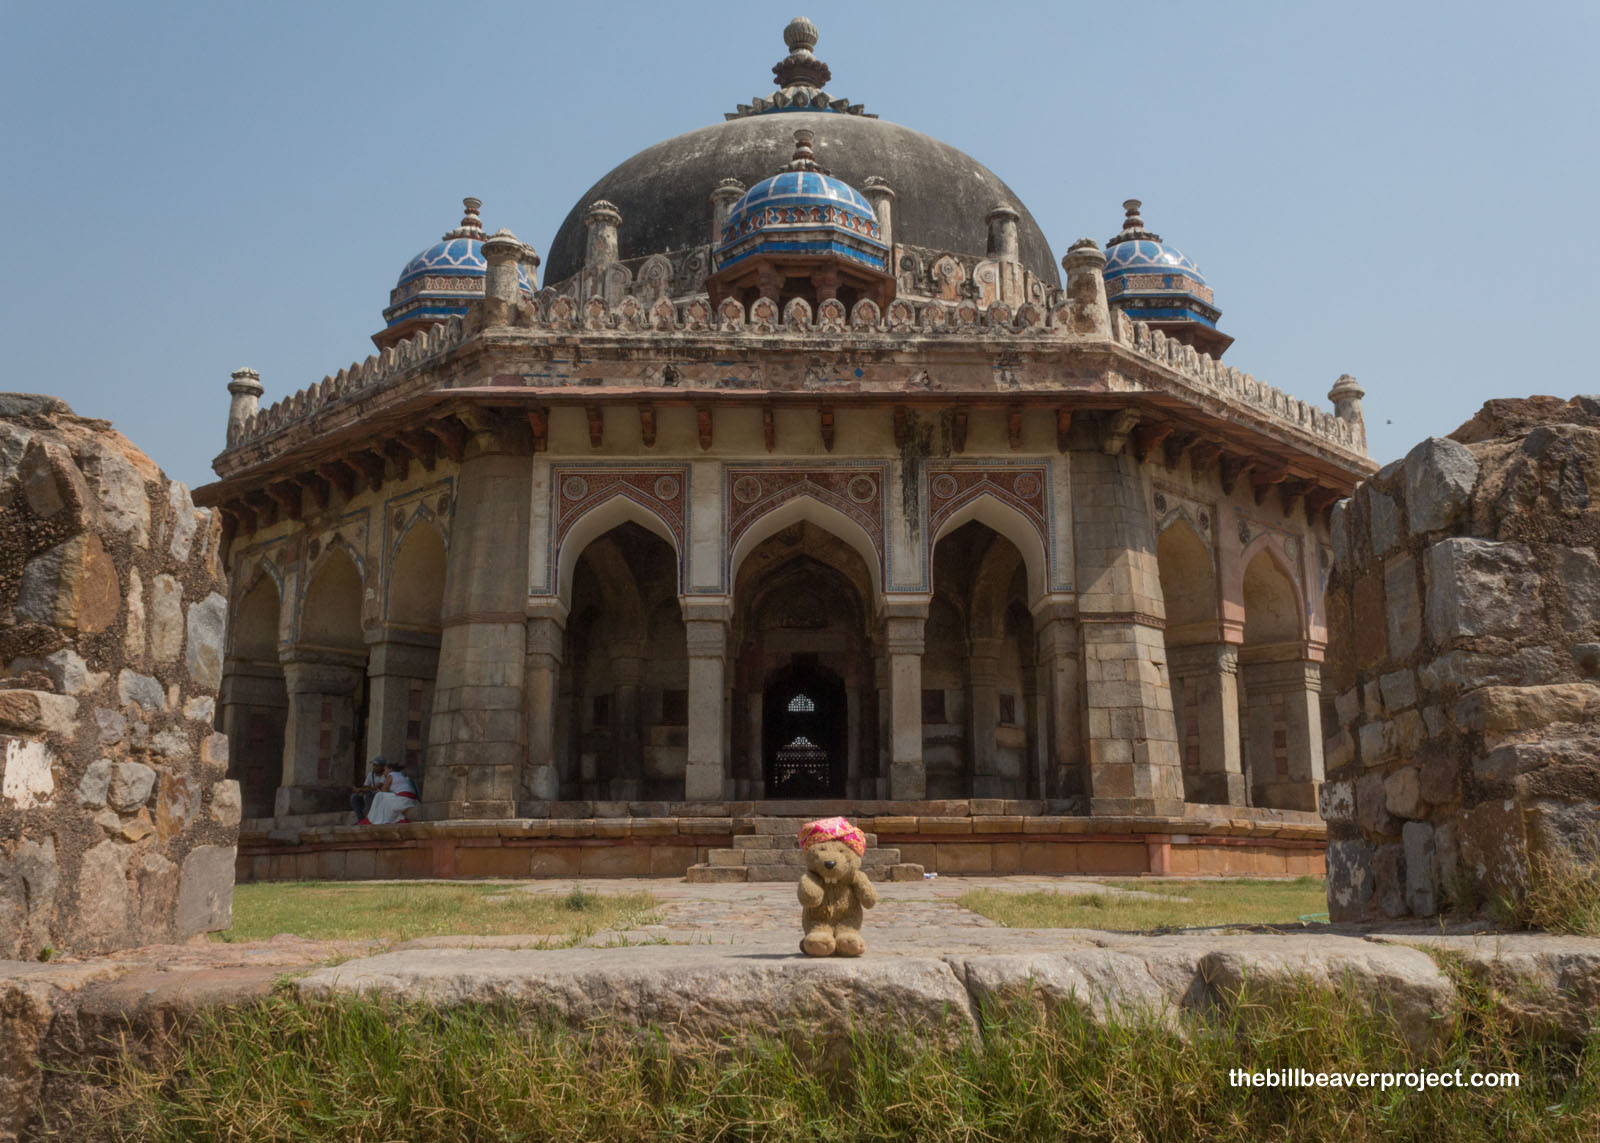 The tomb of Isa Khan!